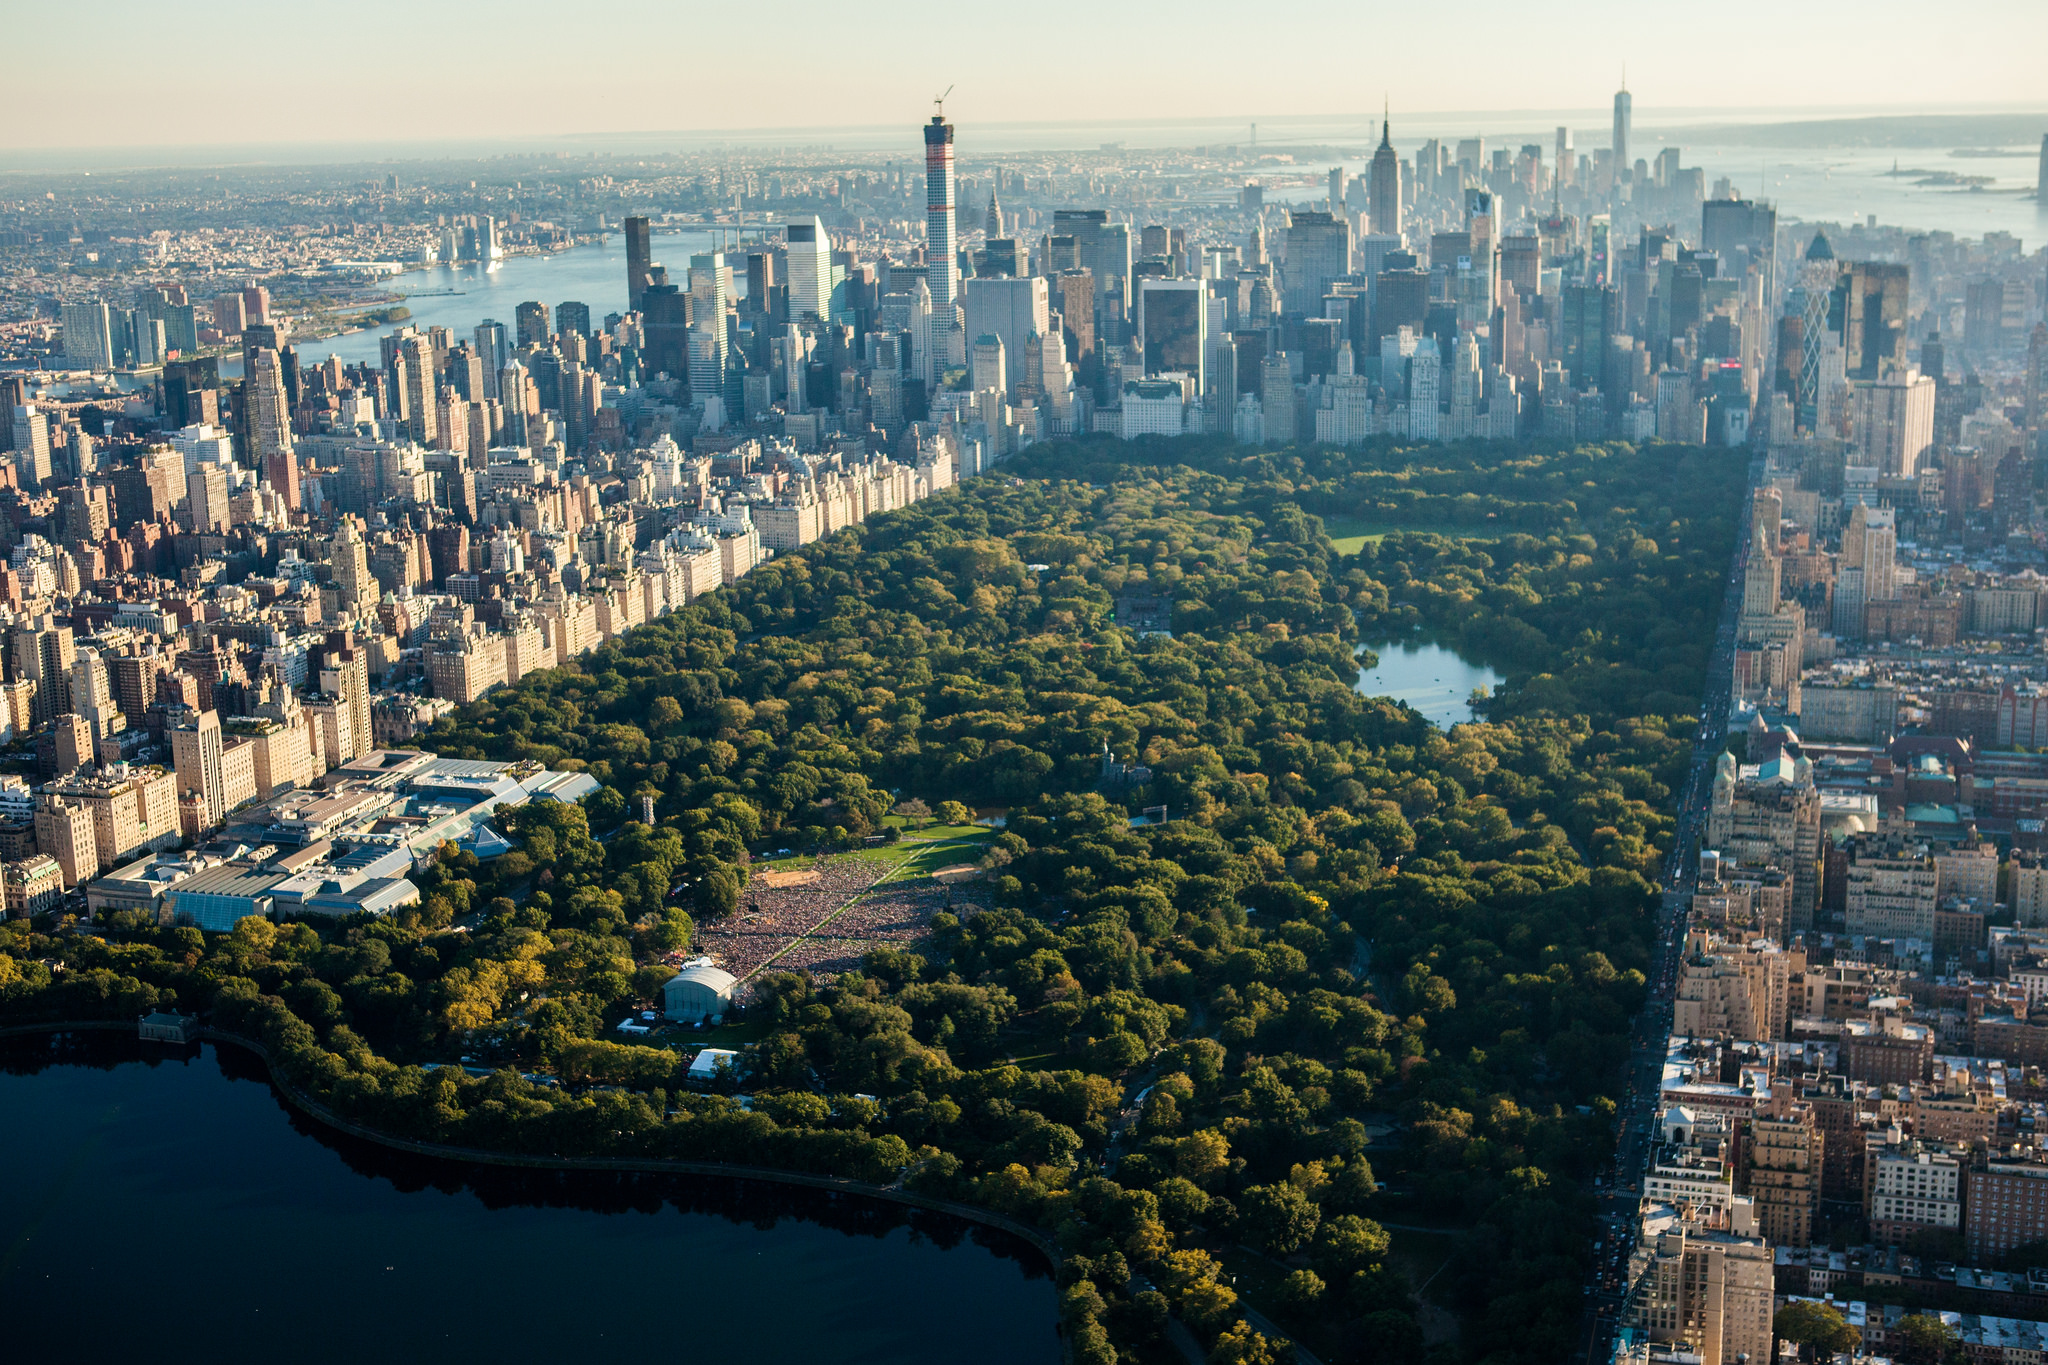 Exploring New York: Spend a Day in Central Park - No Checked Bags